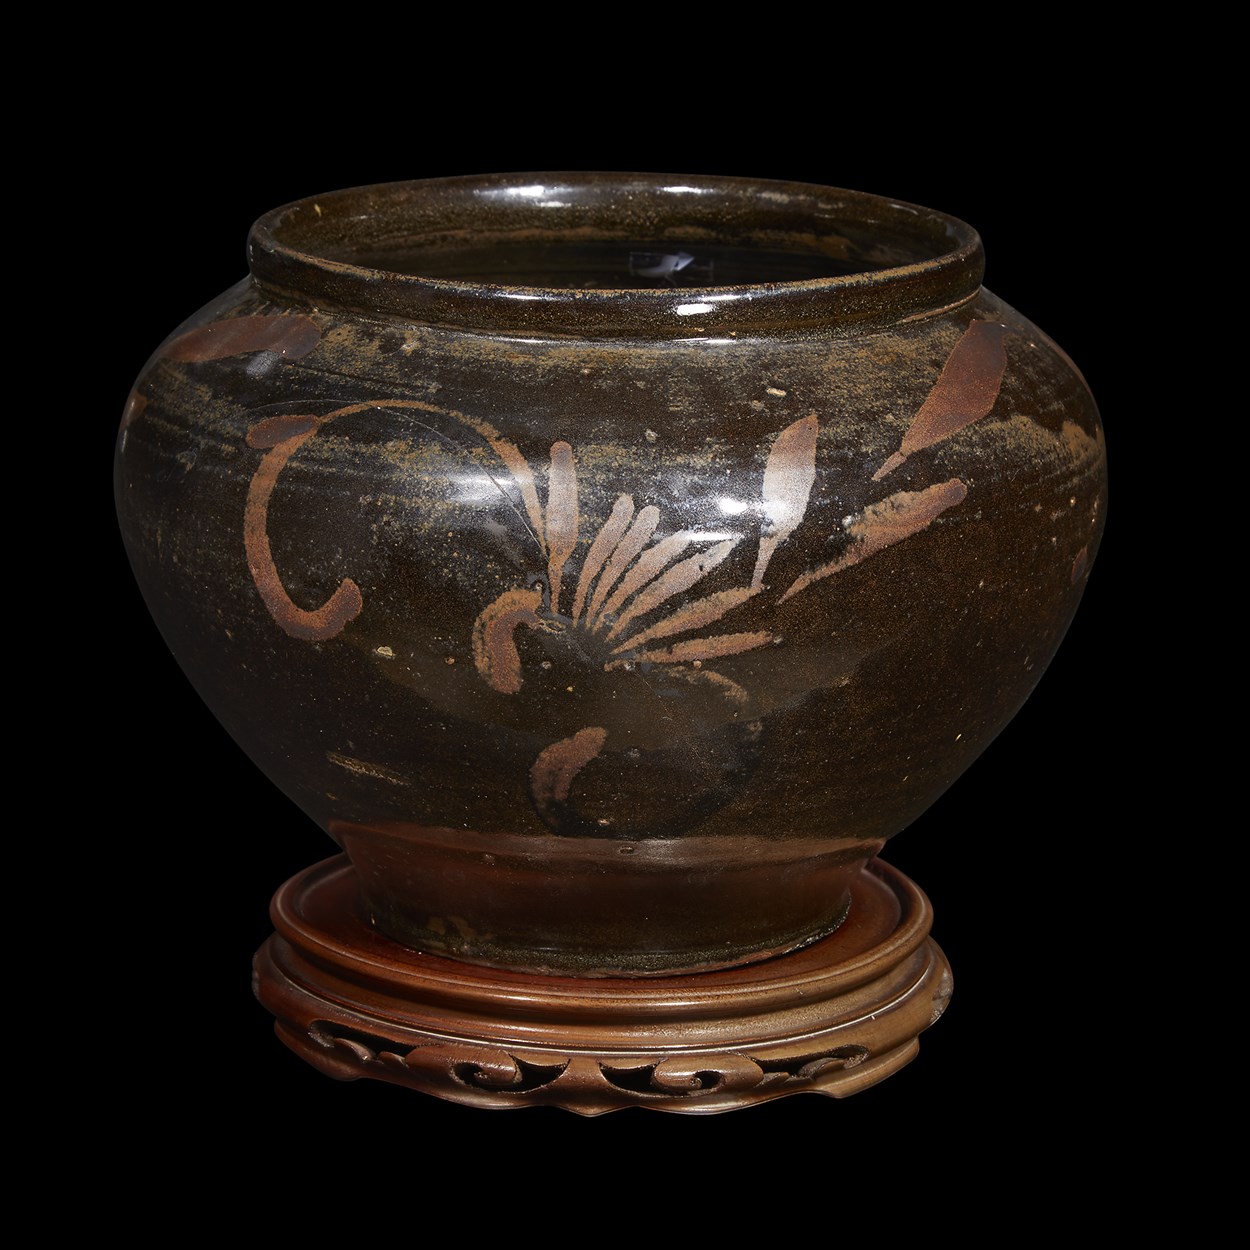 Lot 154 - A Chinese black-glazed wide-mouthed jar, "Guan"